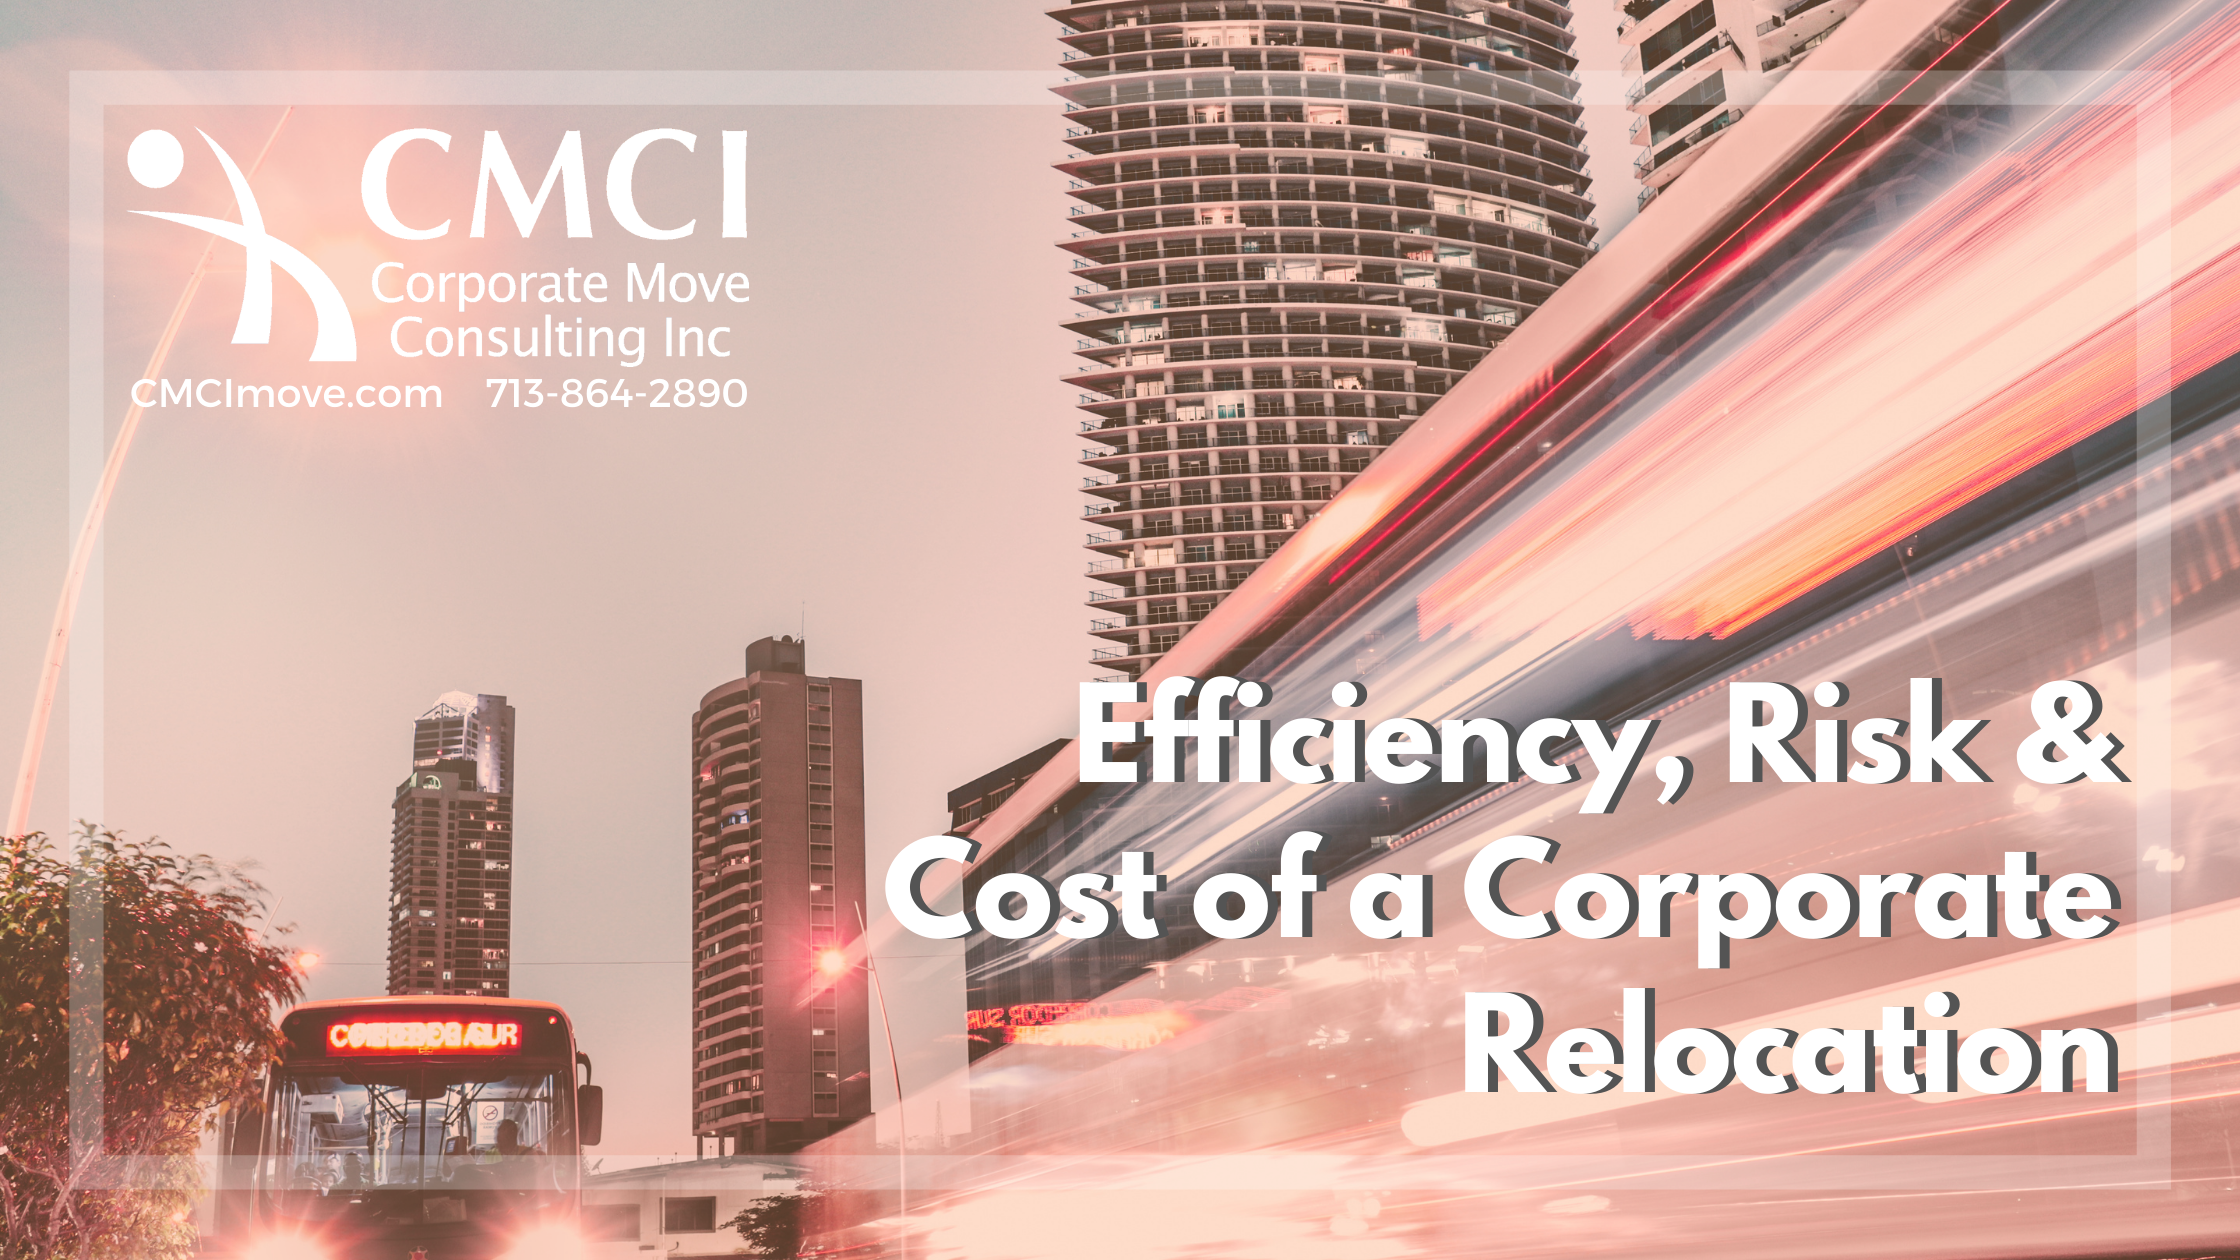 Efficiency, Risk & Cost of a Corporate Relocation